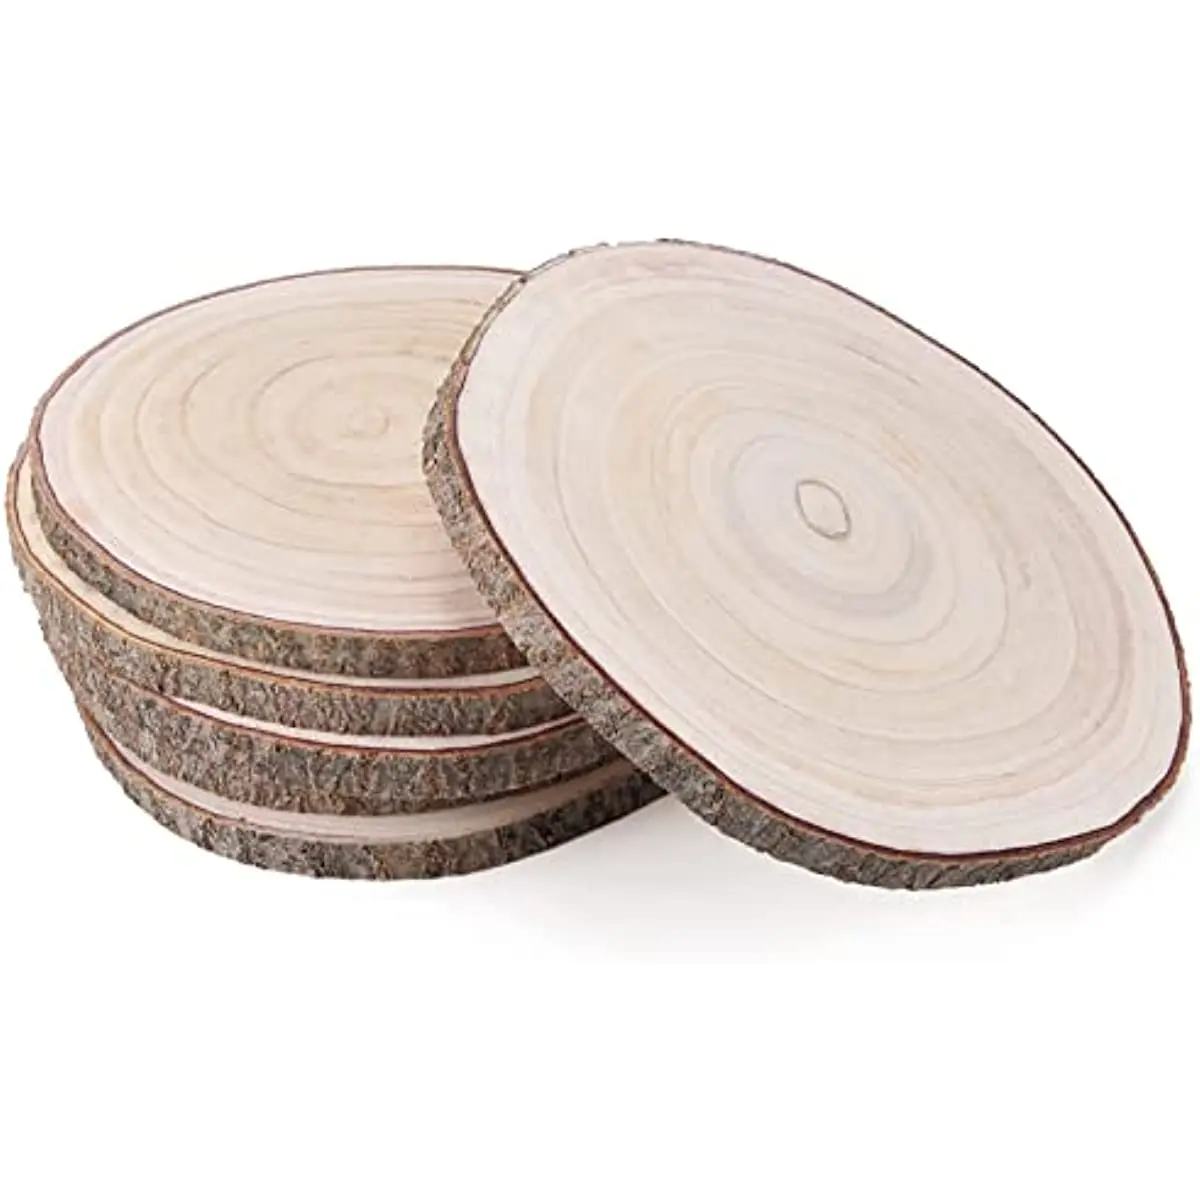 Wood Slices 6 Pack 7-8 Wood Rounds, Large Wood Slices for Centerpieces  Unfinished Wooden Ornaments for Crafts,Wedding,Table Centerpieces,DIY